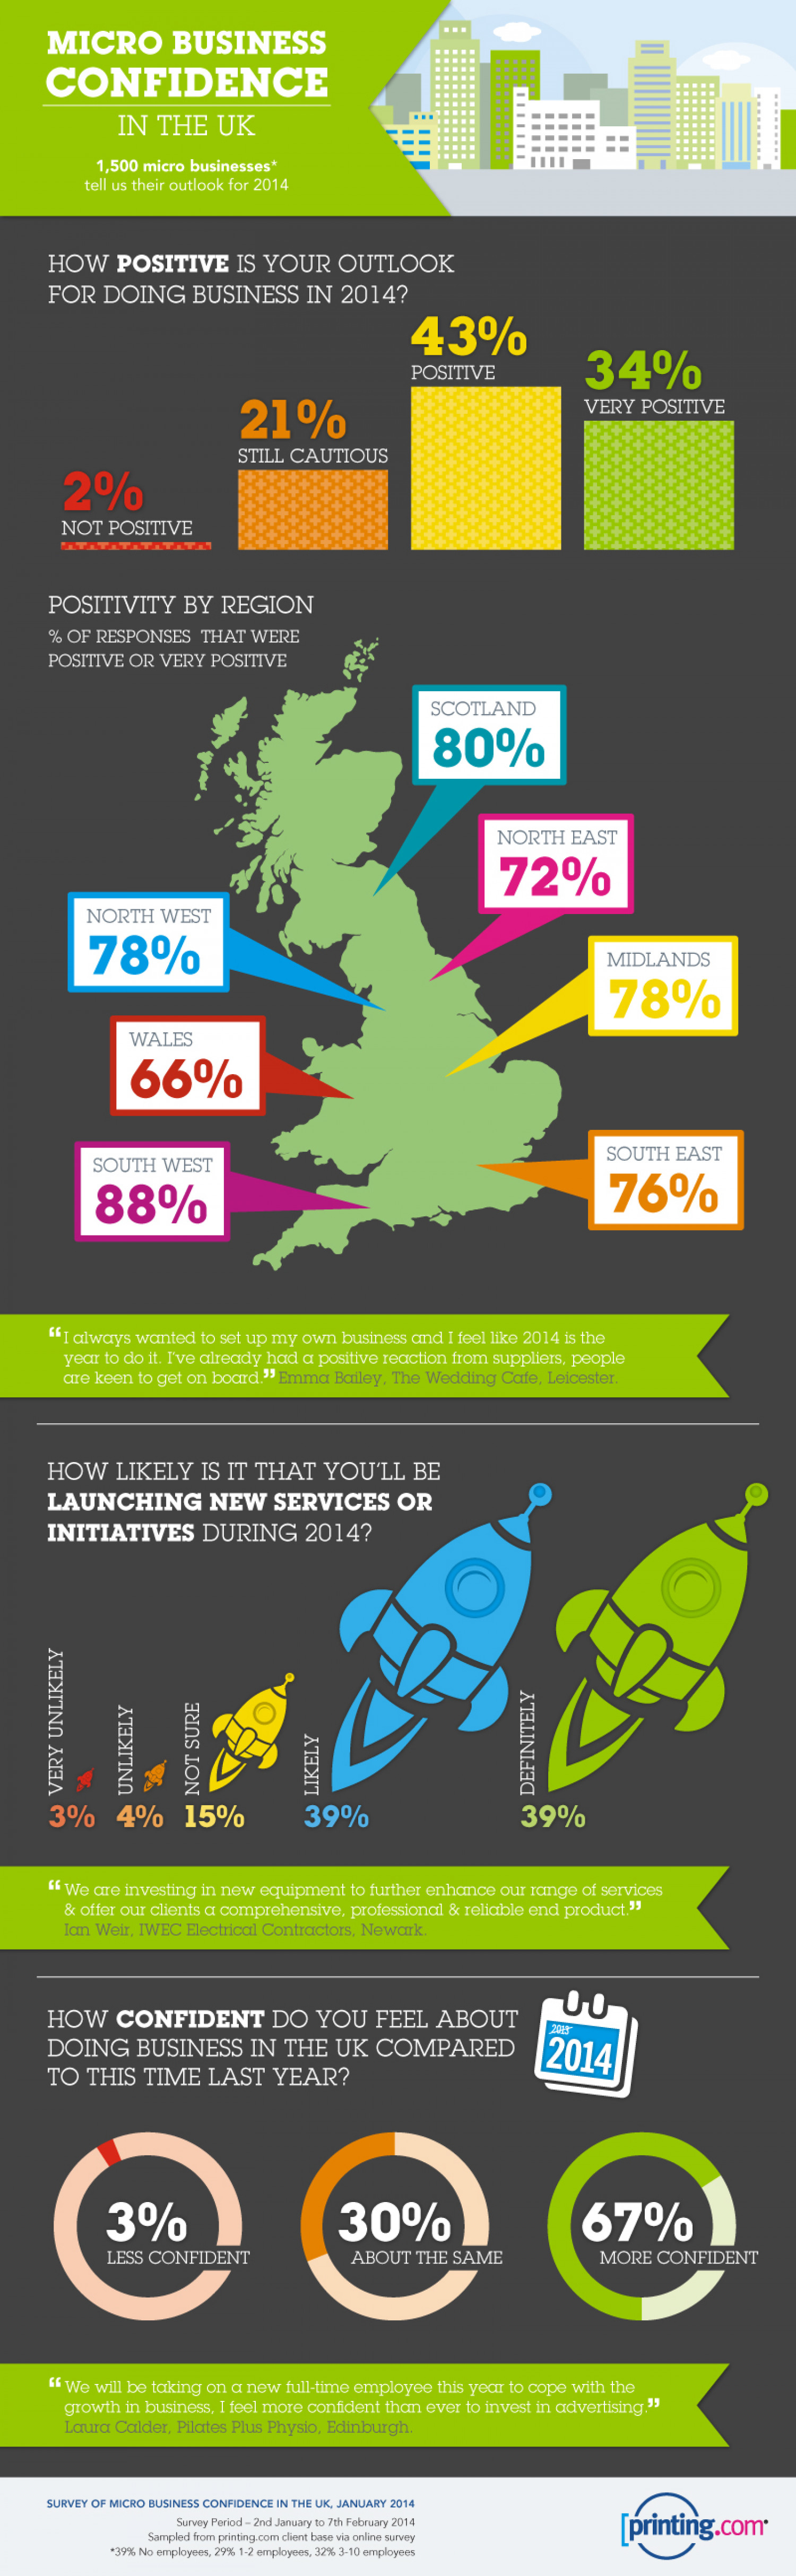 Micro Business Confidence In The UK Infographic